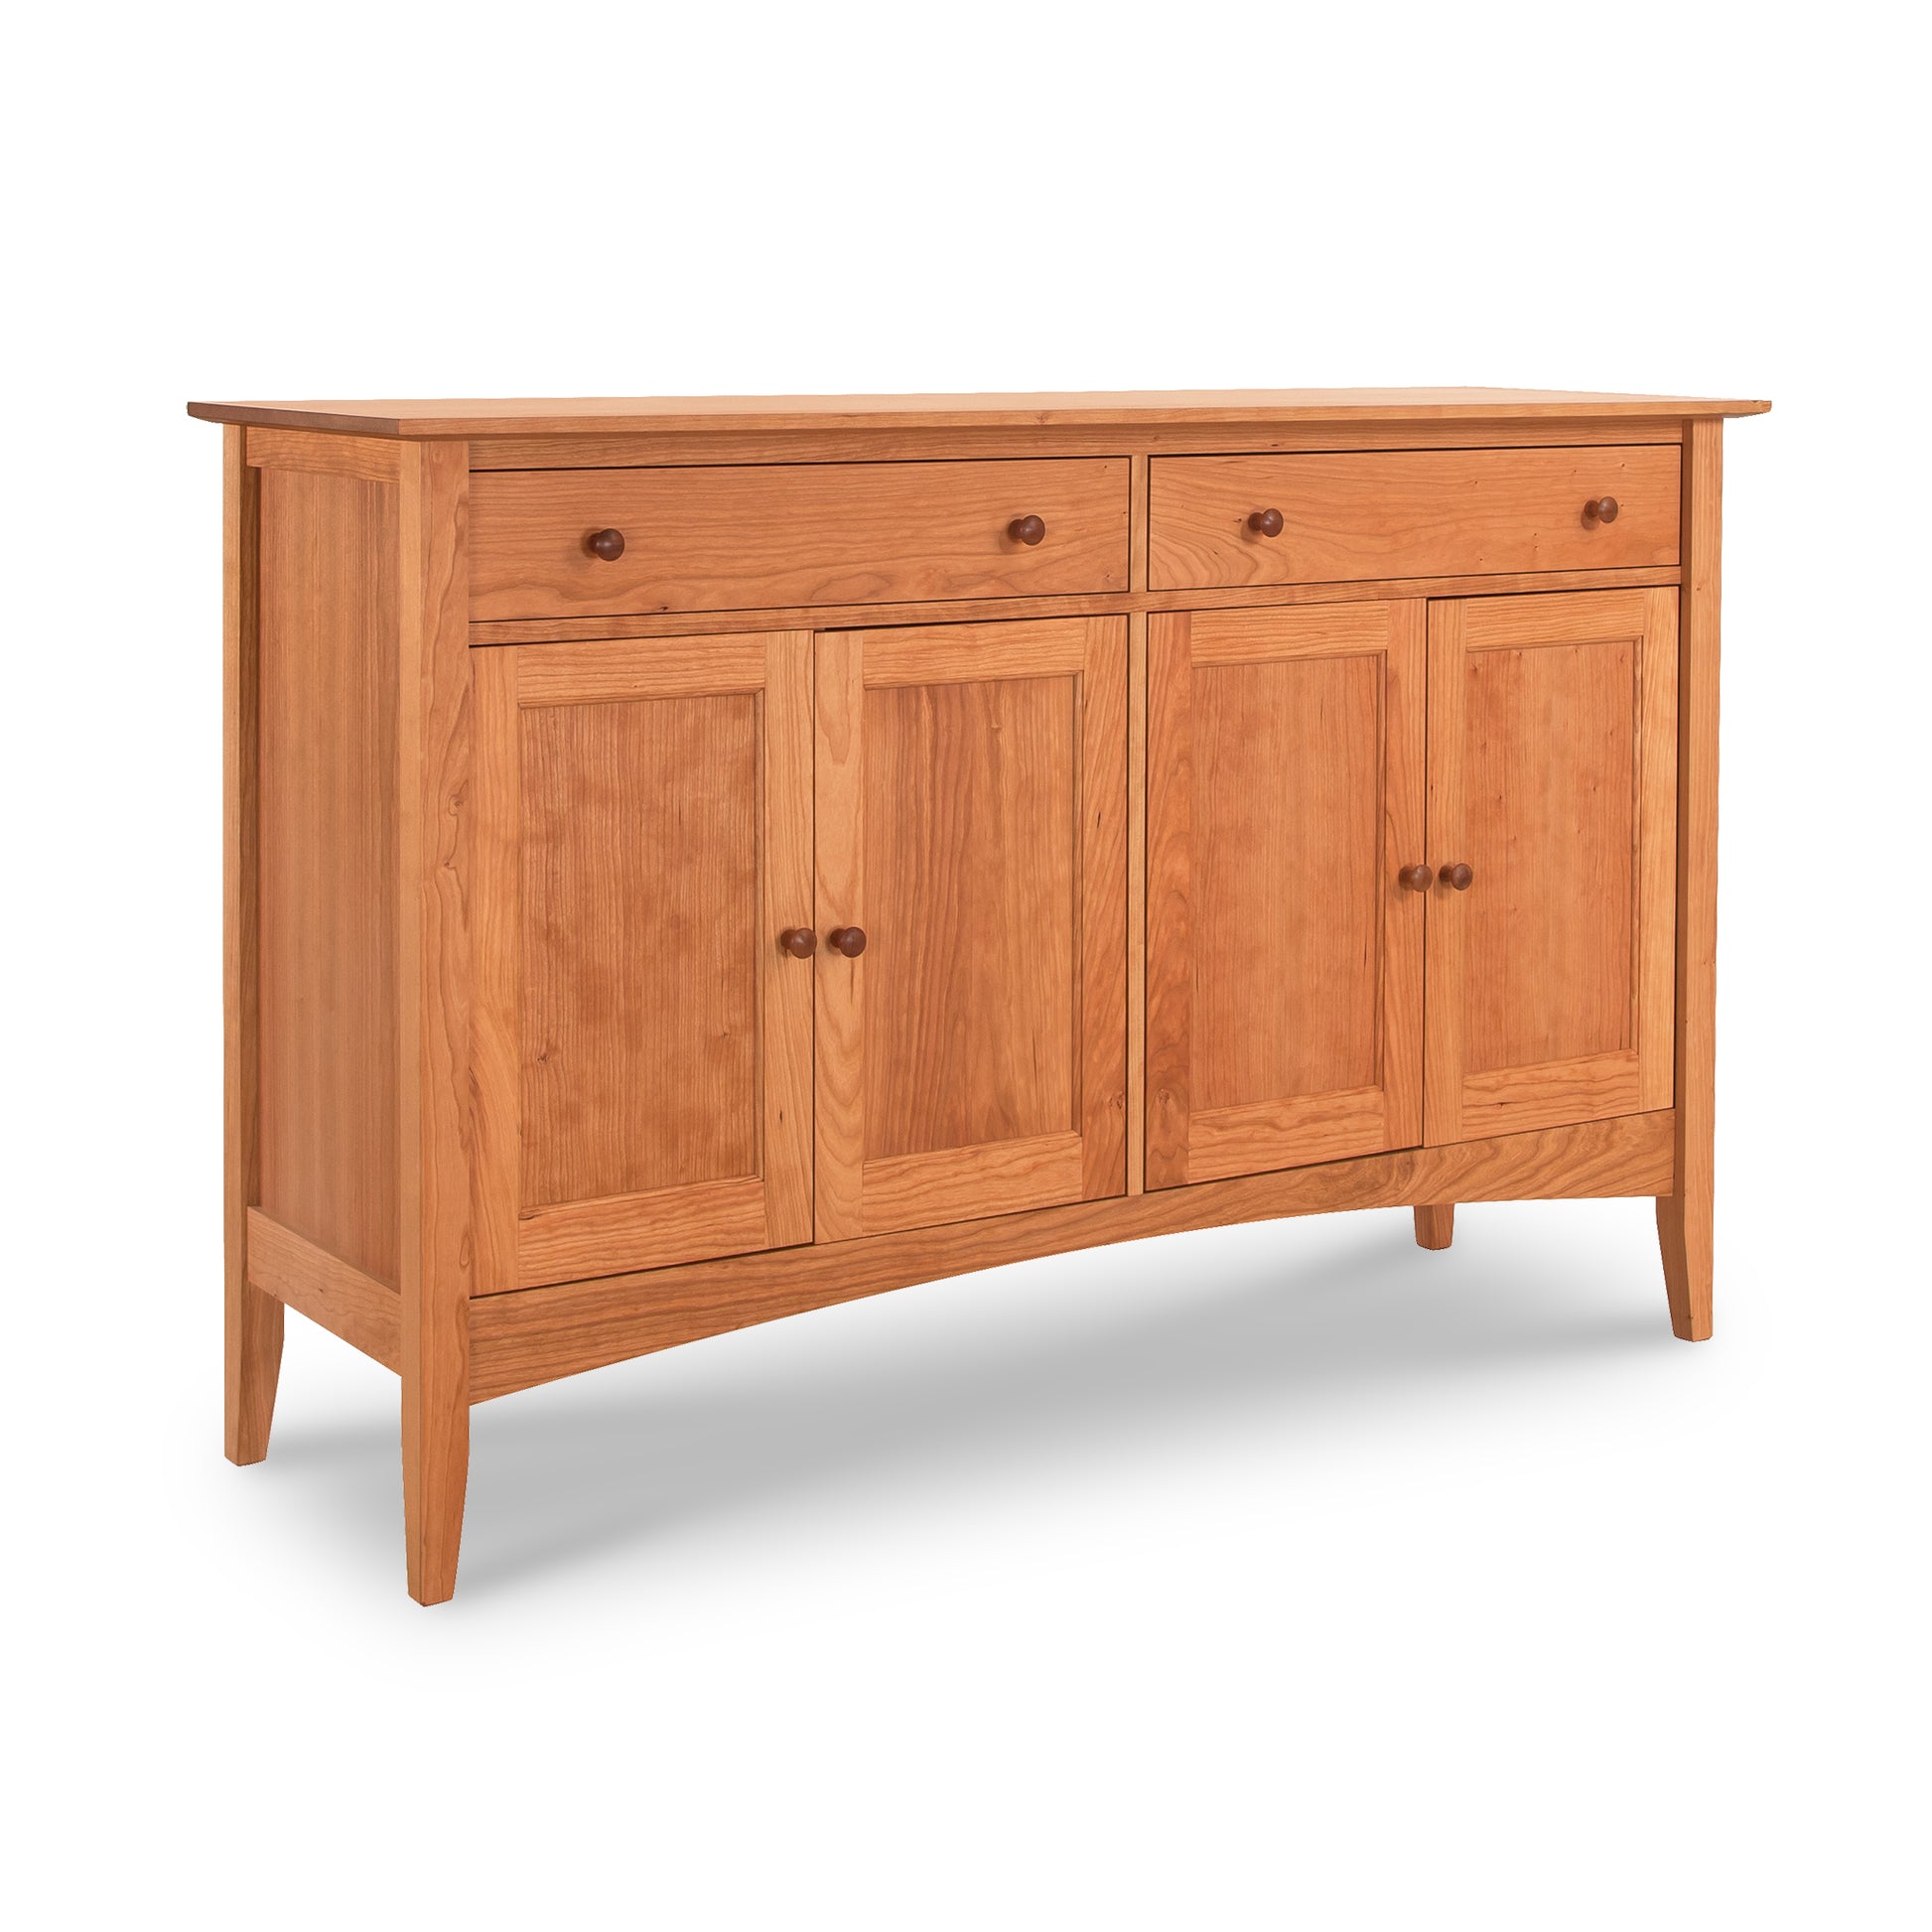 The Maple Corner Woodworks American Shaker Sideboard showcases Vermont craftsmanship and solid hardwood construction. It features two doors and two drawers for ample storage.